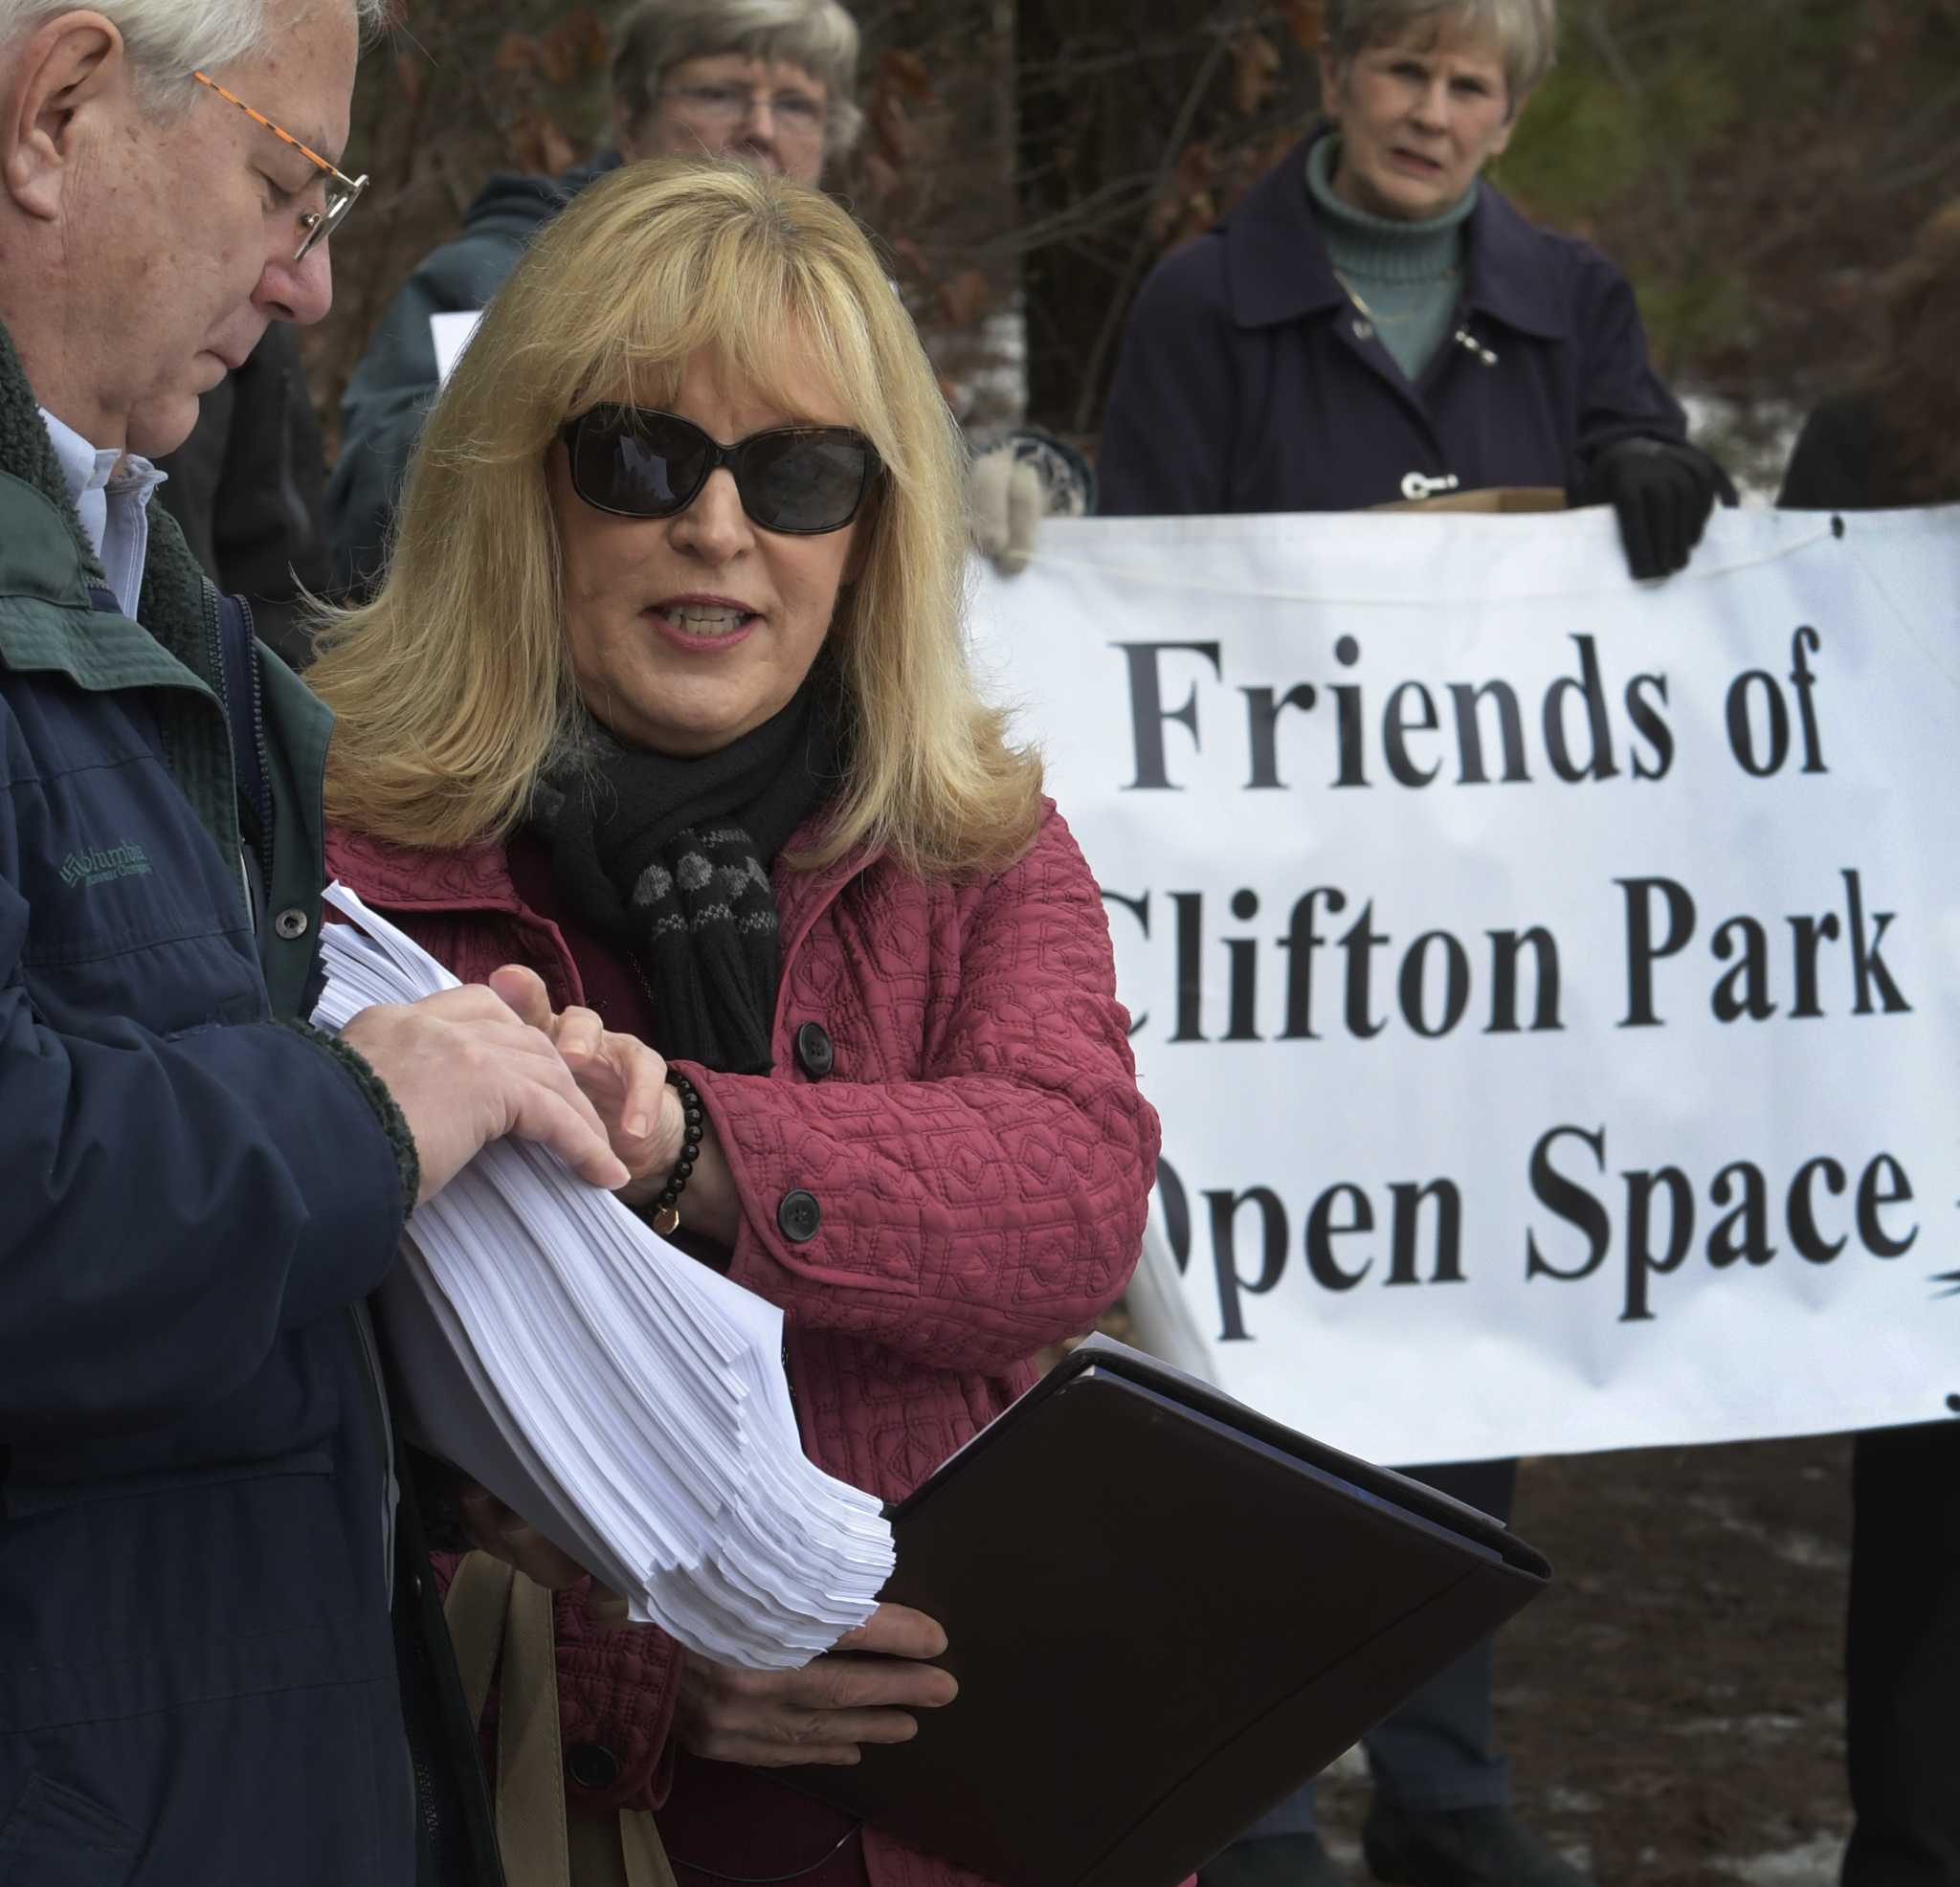 Supervisor Clifton Park green space adds value to town